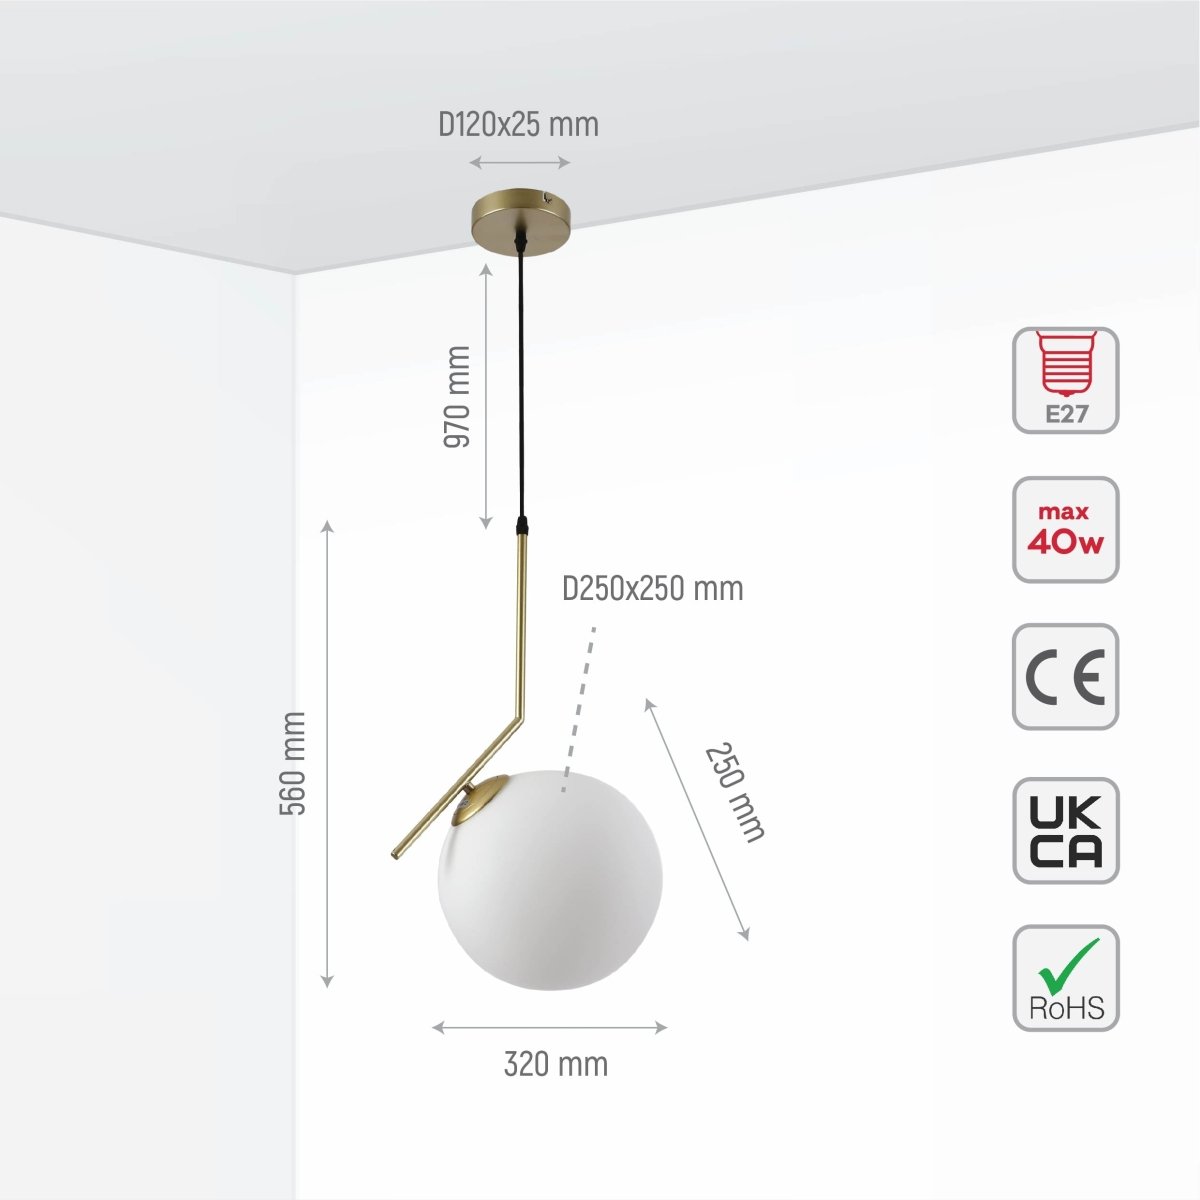 Size and specs of Antique Brass Metal Opal White Glass Globe Pendant Ceiling Light D200 with E27 Fitting | TEKLED 158-19660